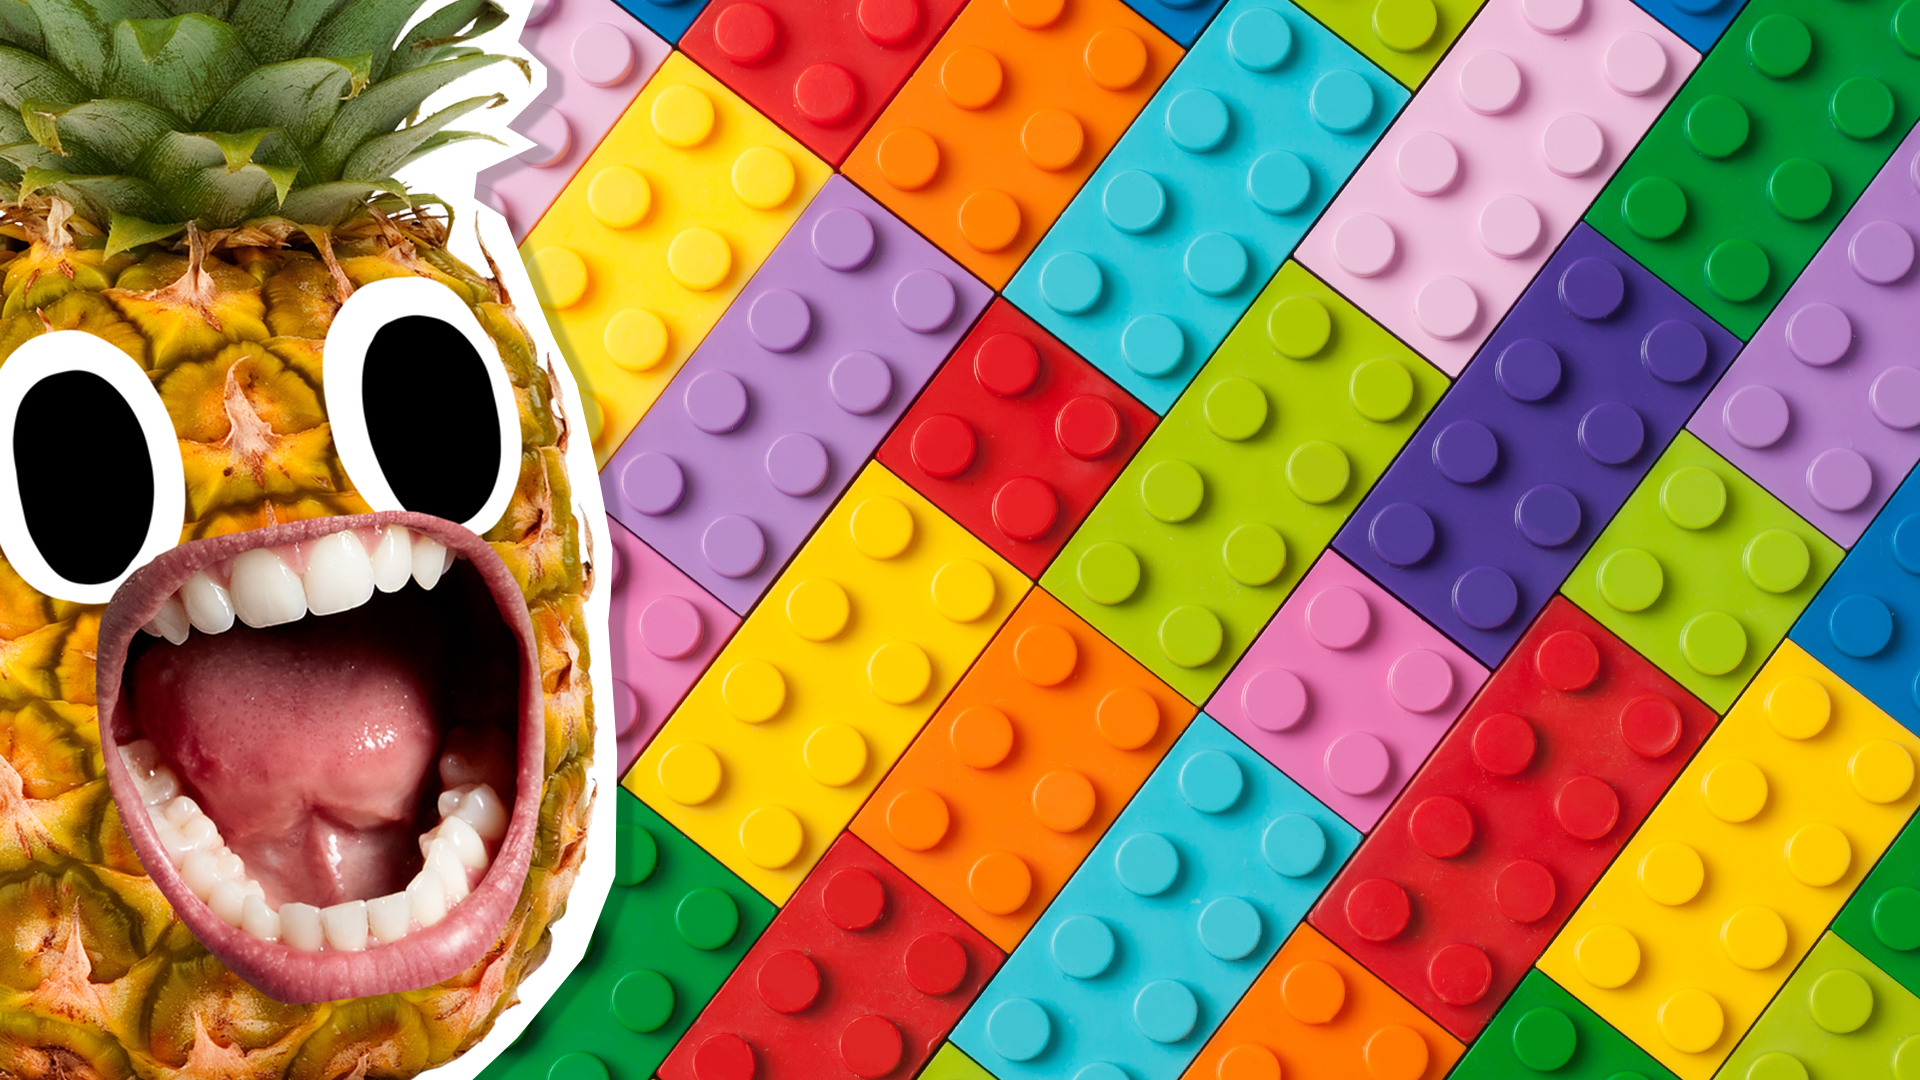 A pineapple screaming at a grid made of Lego